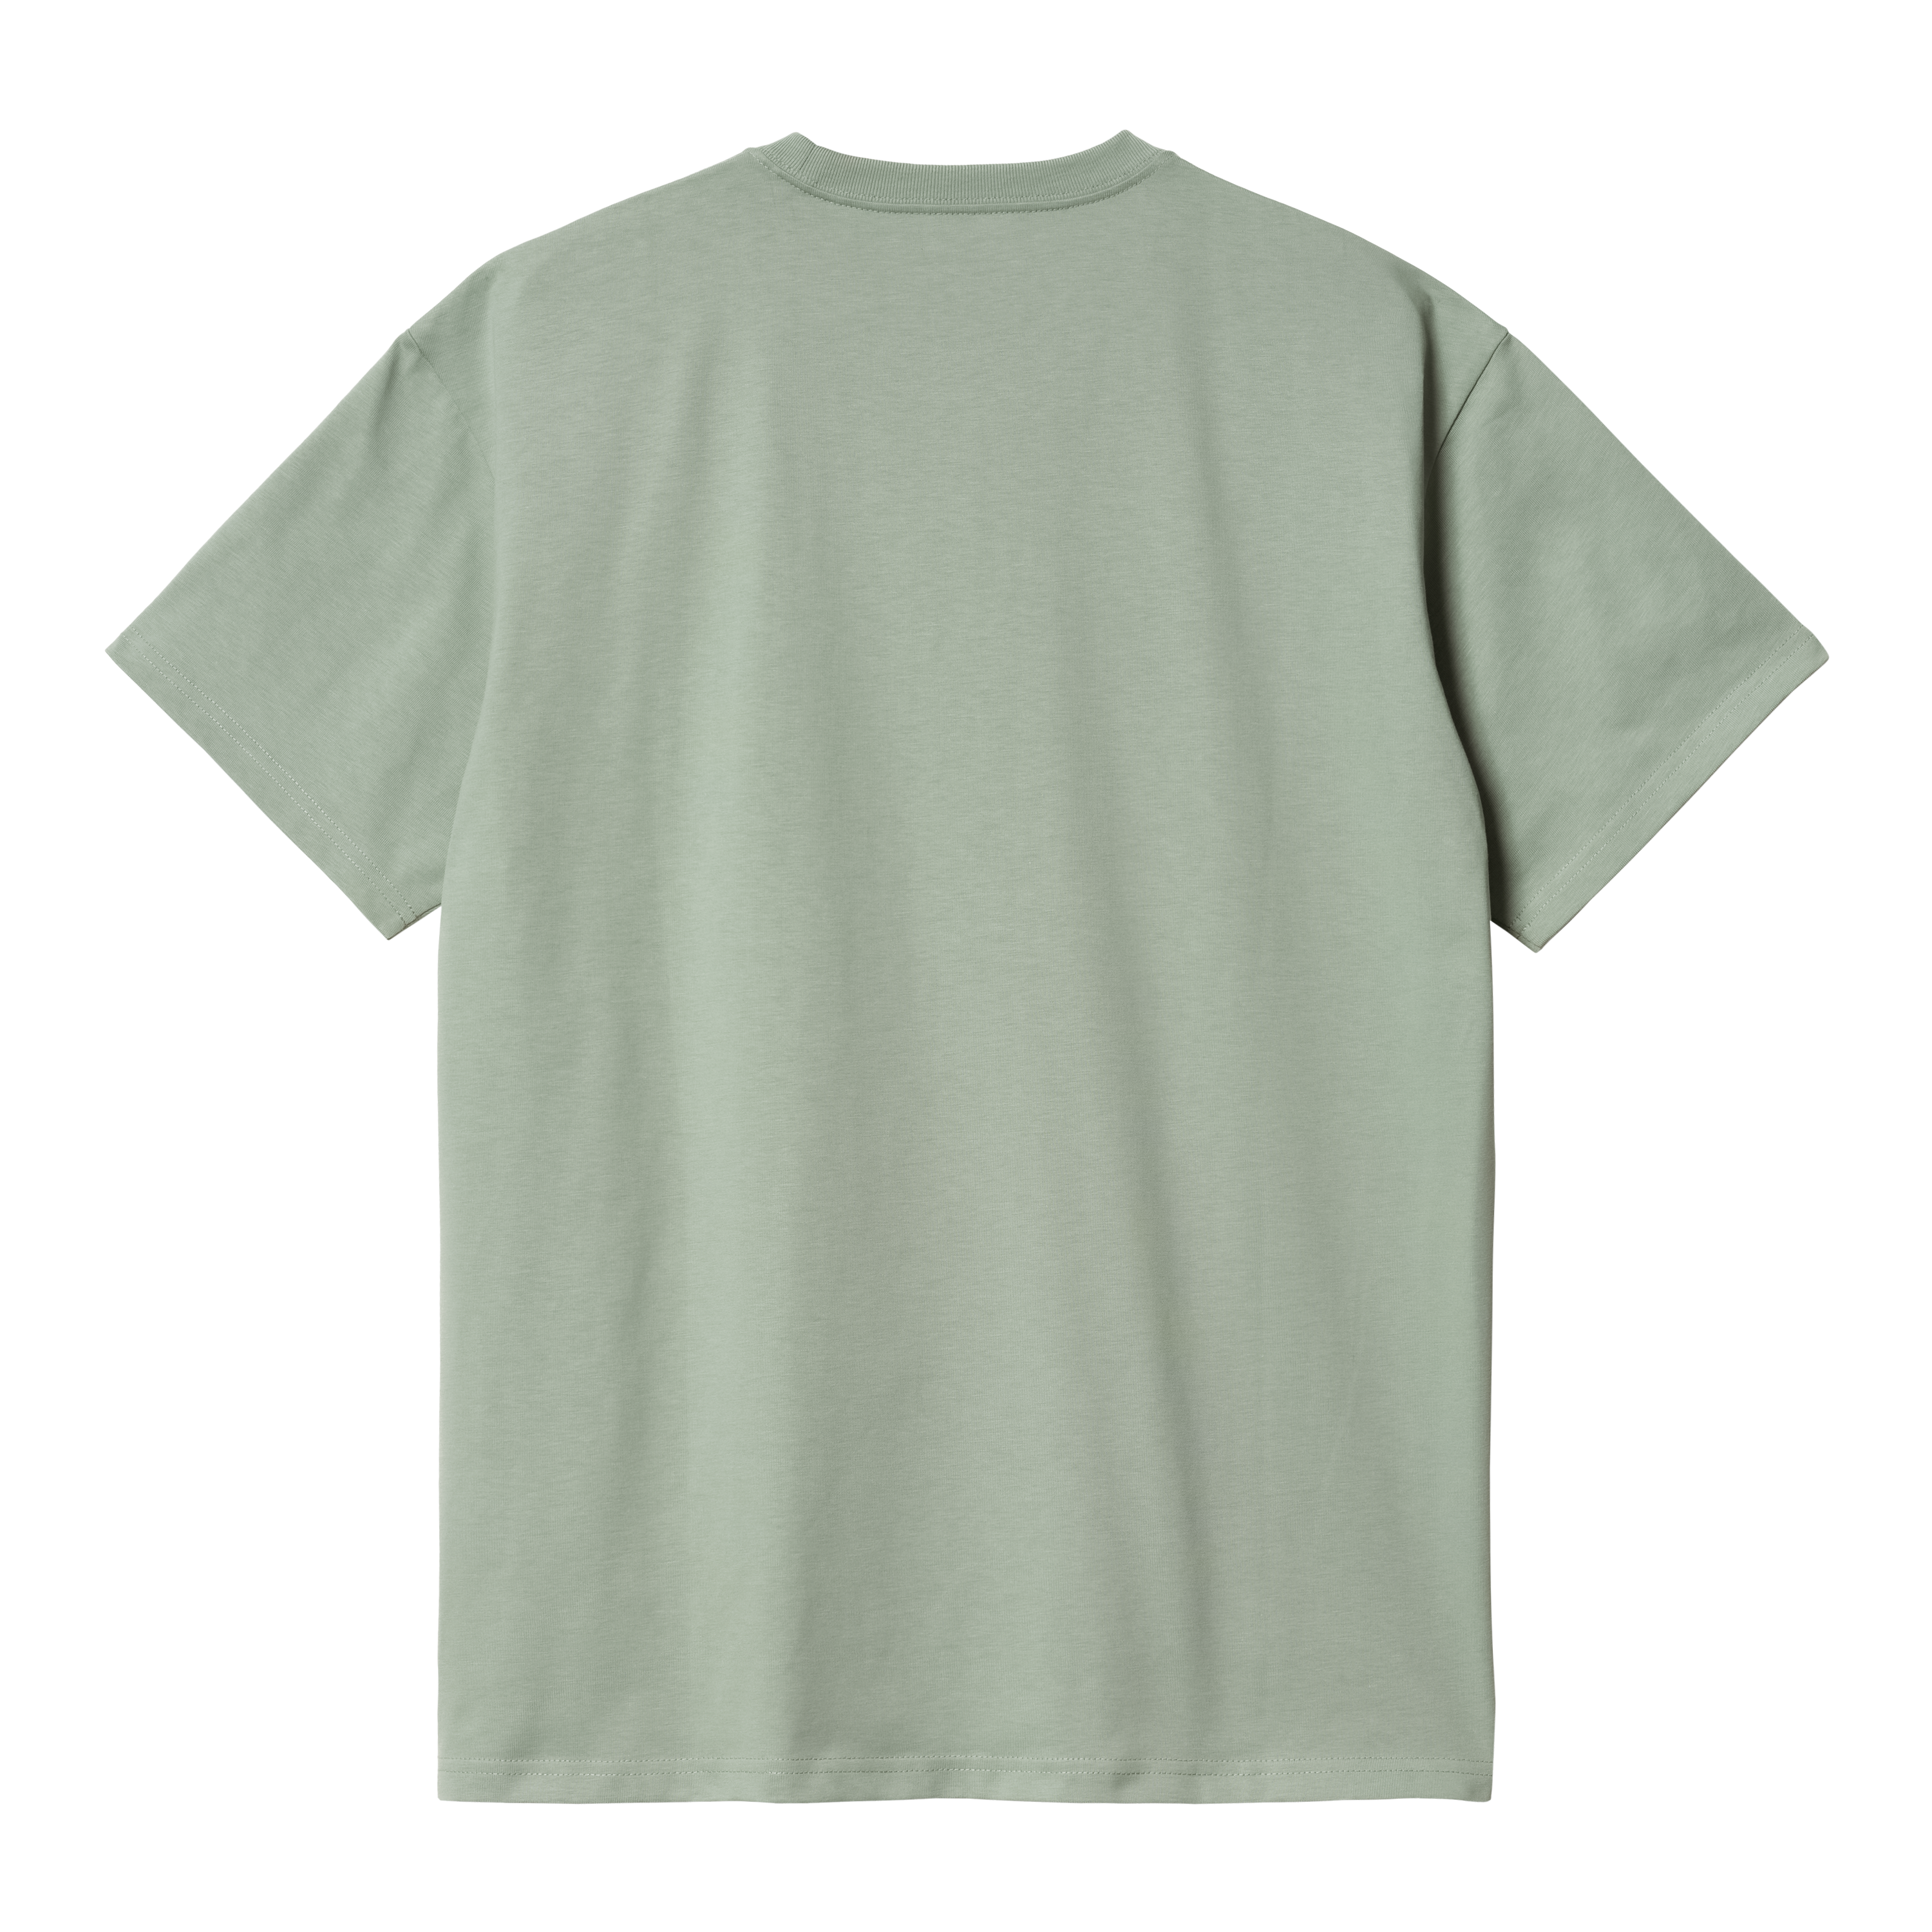 Carhartt WIP - CHASE T-SHIRT - Glassy Teal/Gold